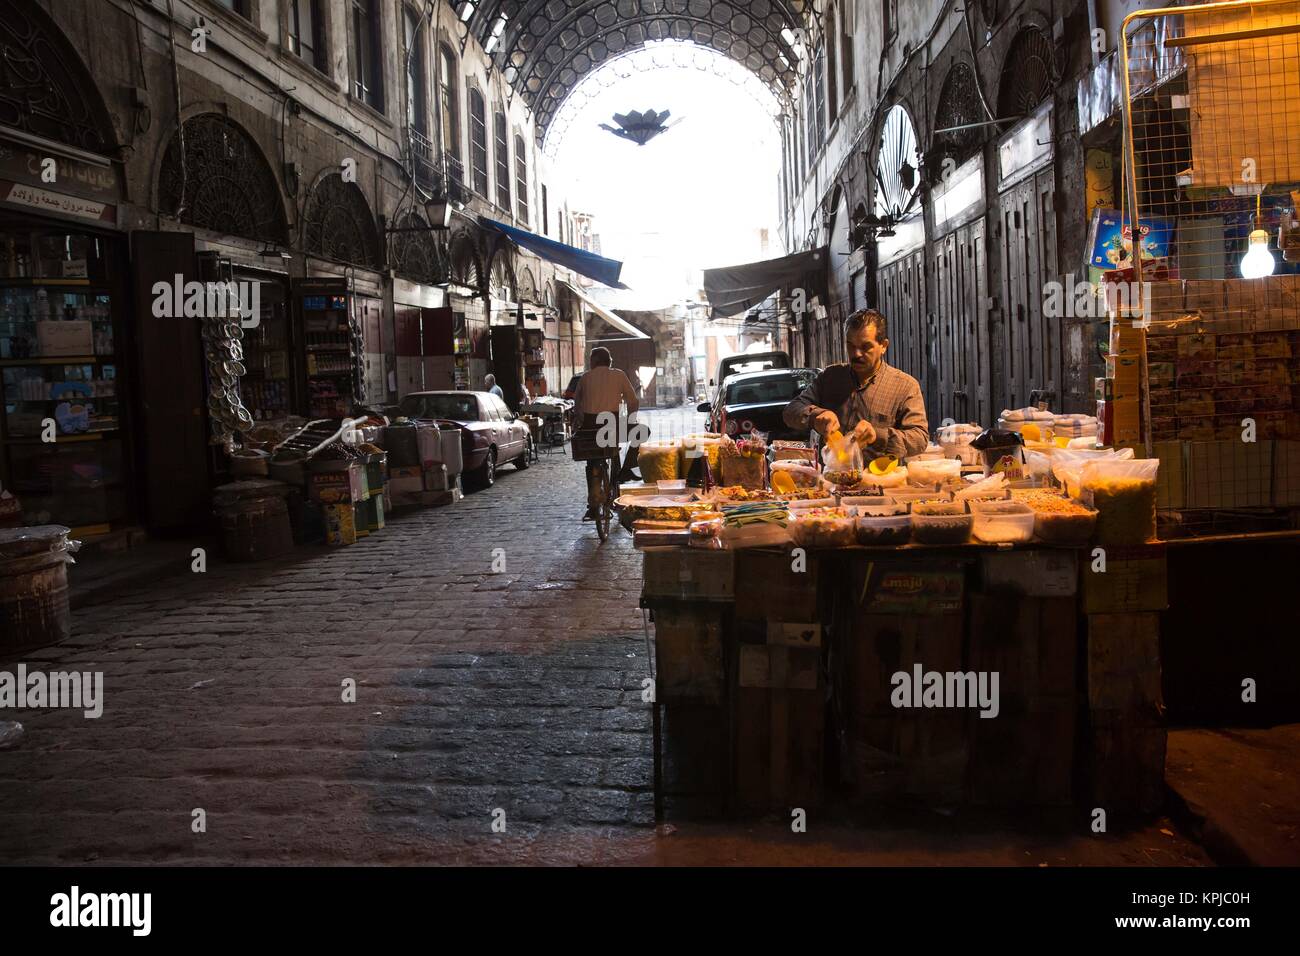 Damascus, Syria. 28th Oct, 2017. A man sells goods in Al-Hamidiyah Souq, in the old city of Damascus.Despite the ongoing conflict in Syria, the life of Damascus still carries on relatively peaceful. Damascus is the capital city of the war torn Syria, it is under control by the official Syrian government led by president Bashar al-Assad. Credit: Sally Hayden/SOPA/ZUMA Wire/Alamy Live News Stock Photo